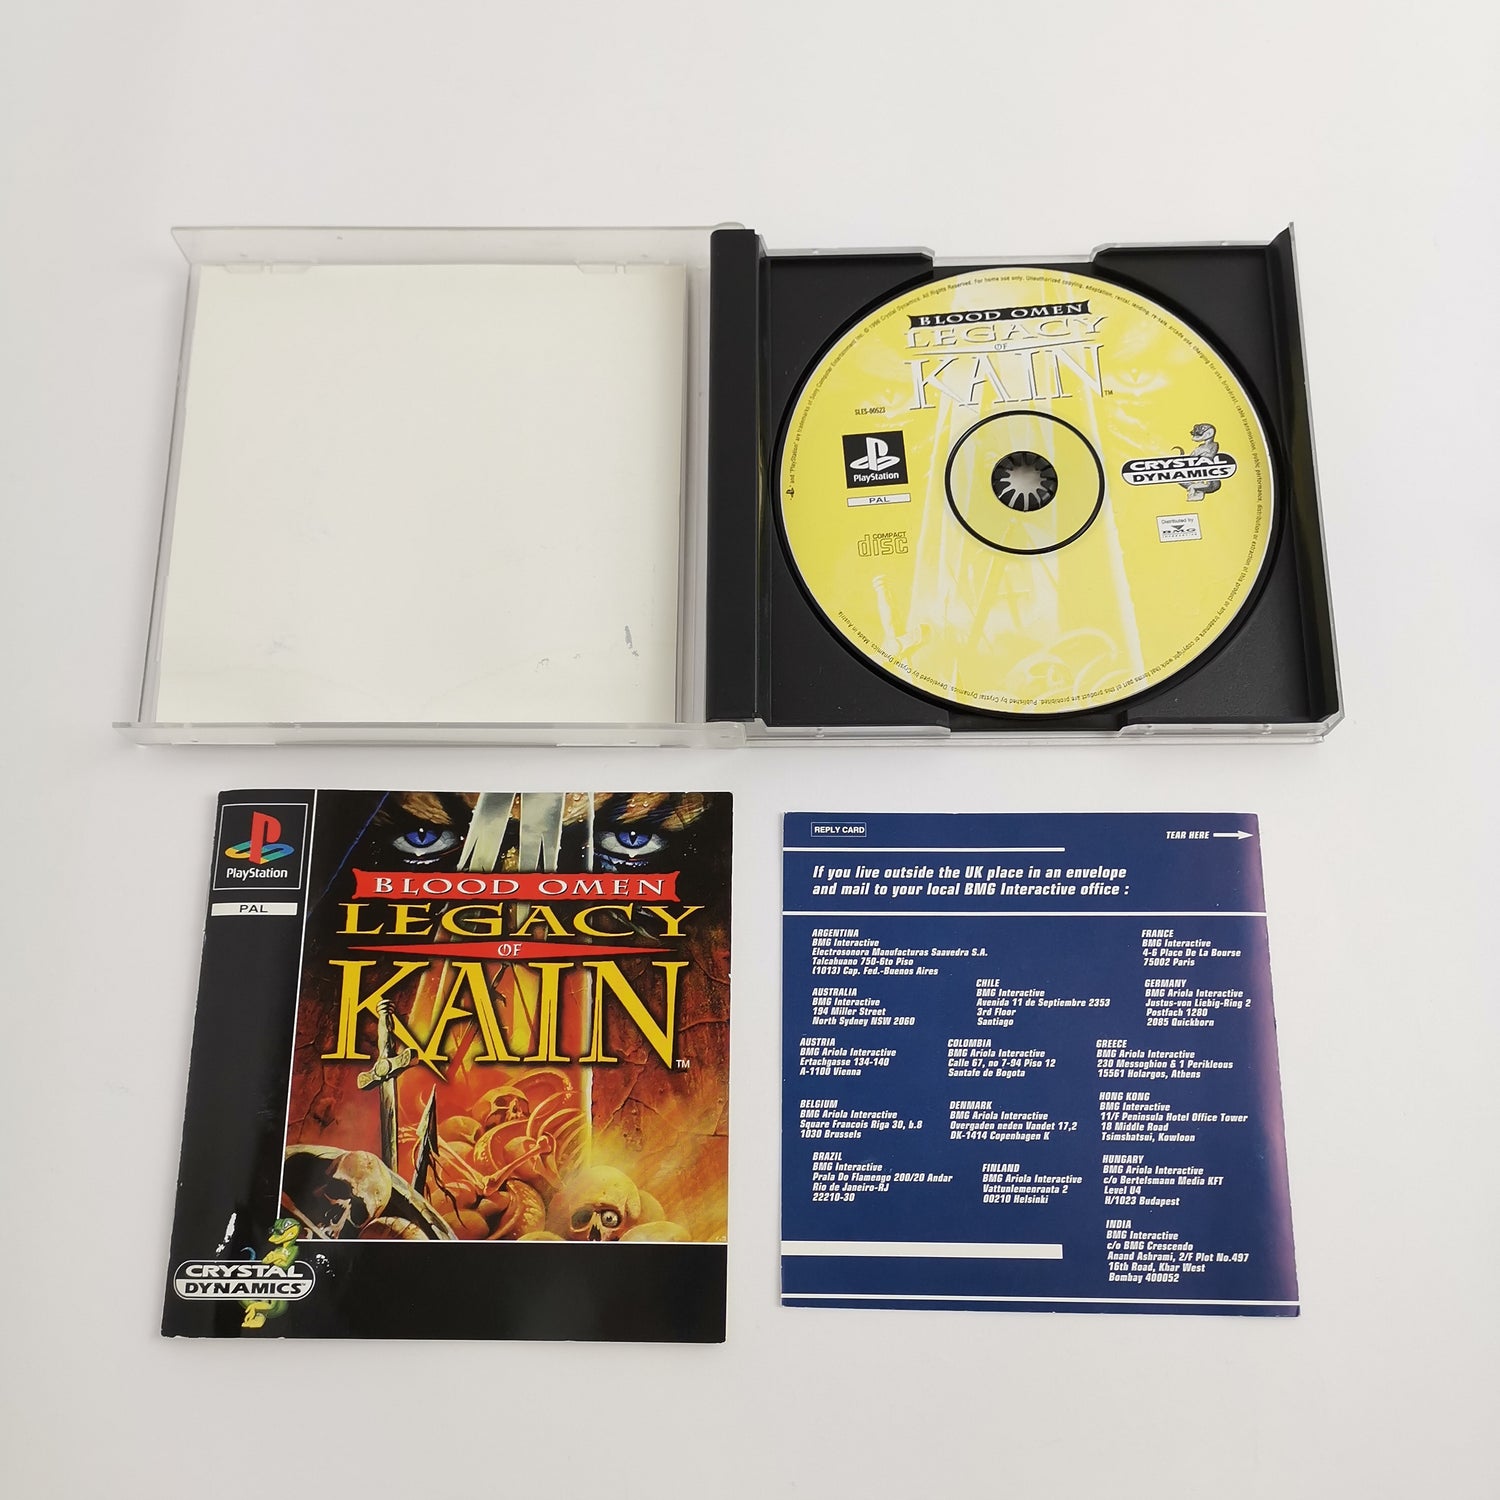 Sony Playstation 1 Game: Blood Omen Legacy of Kain | PS1 PSX - OVP PAL